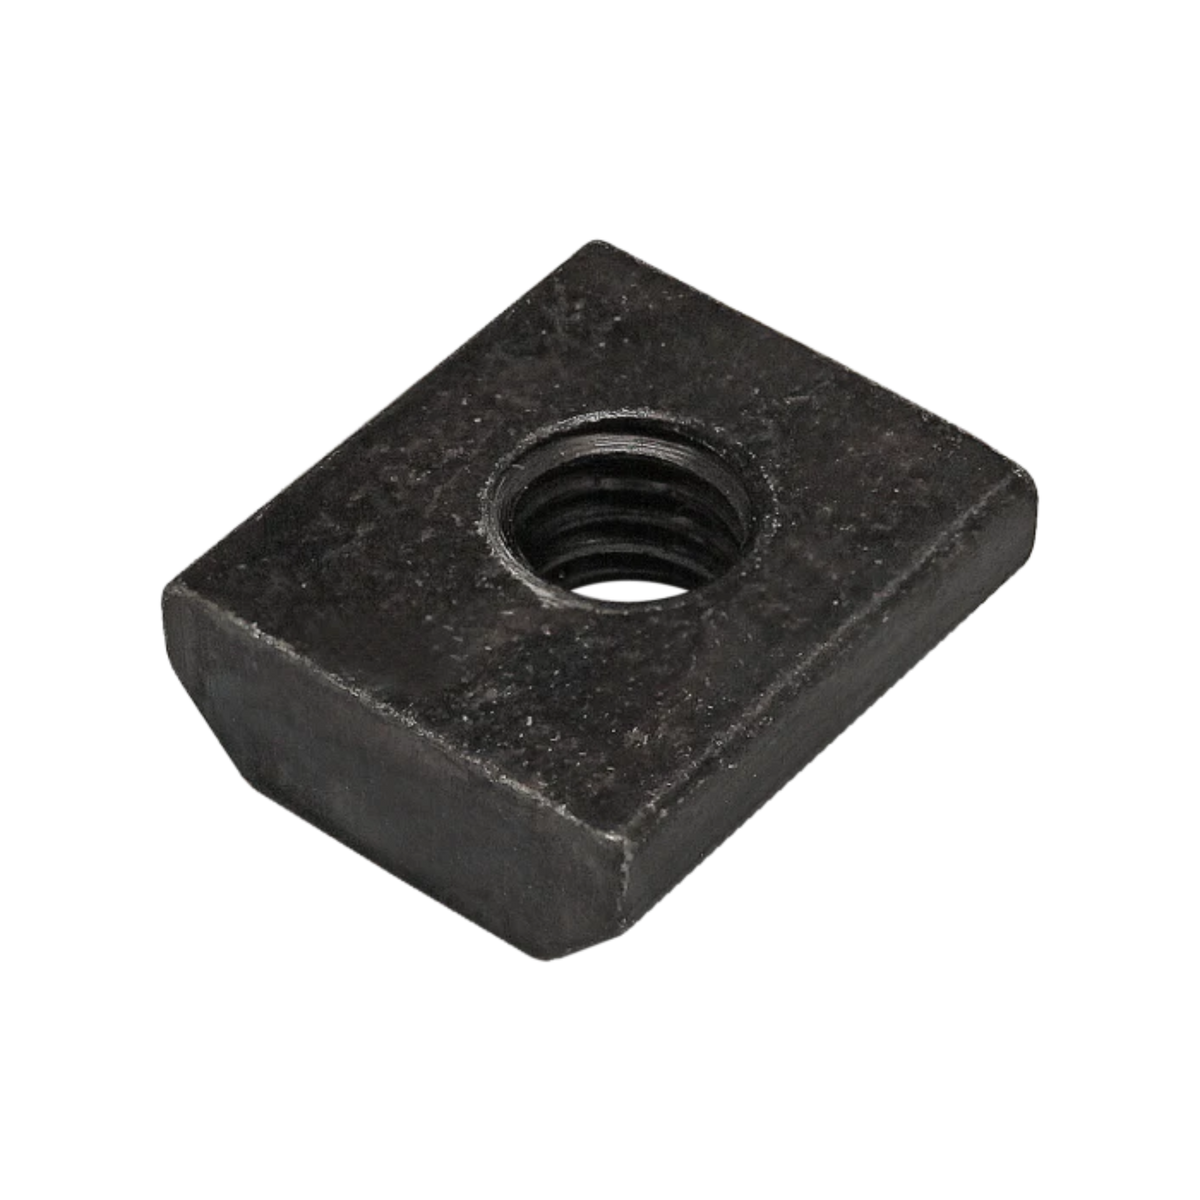 black, metal, square t-nut with a rounded bo0ttom and a threaded hole in the top